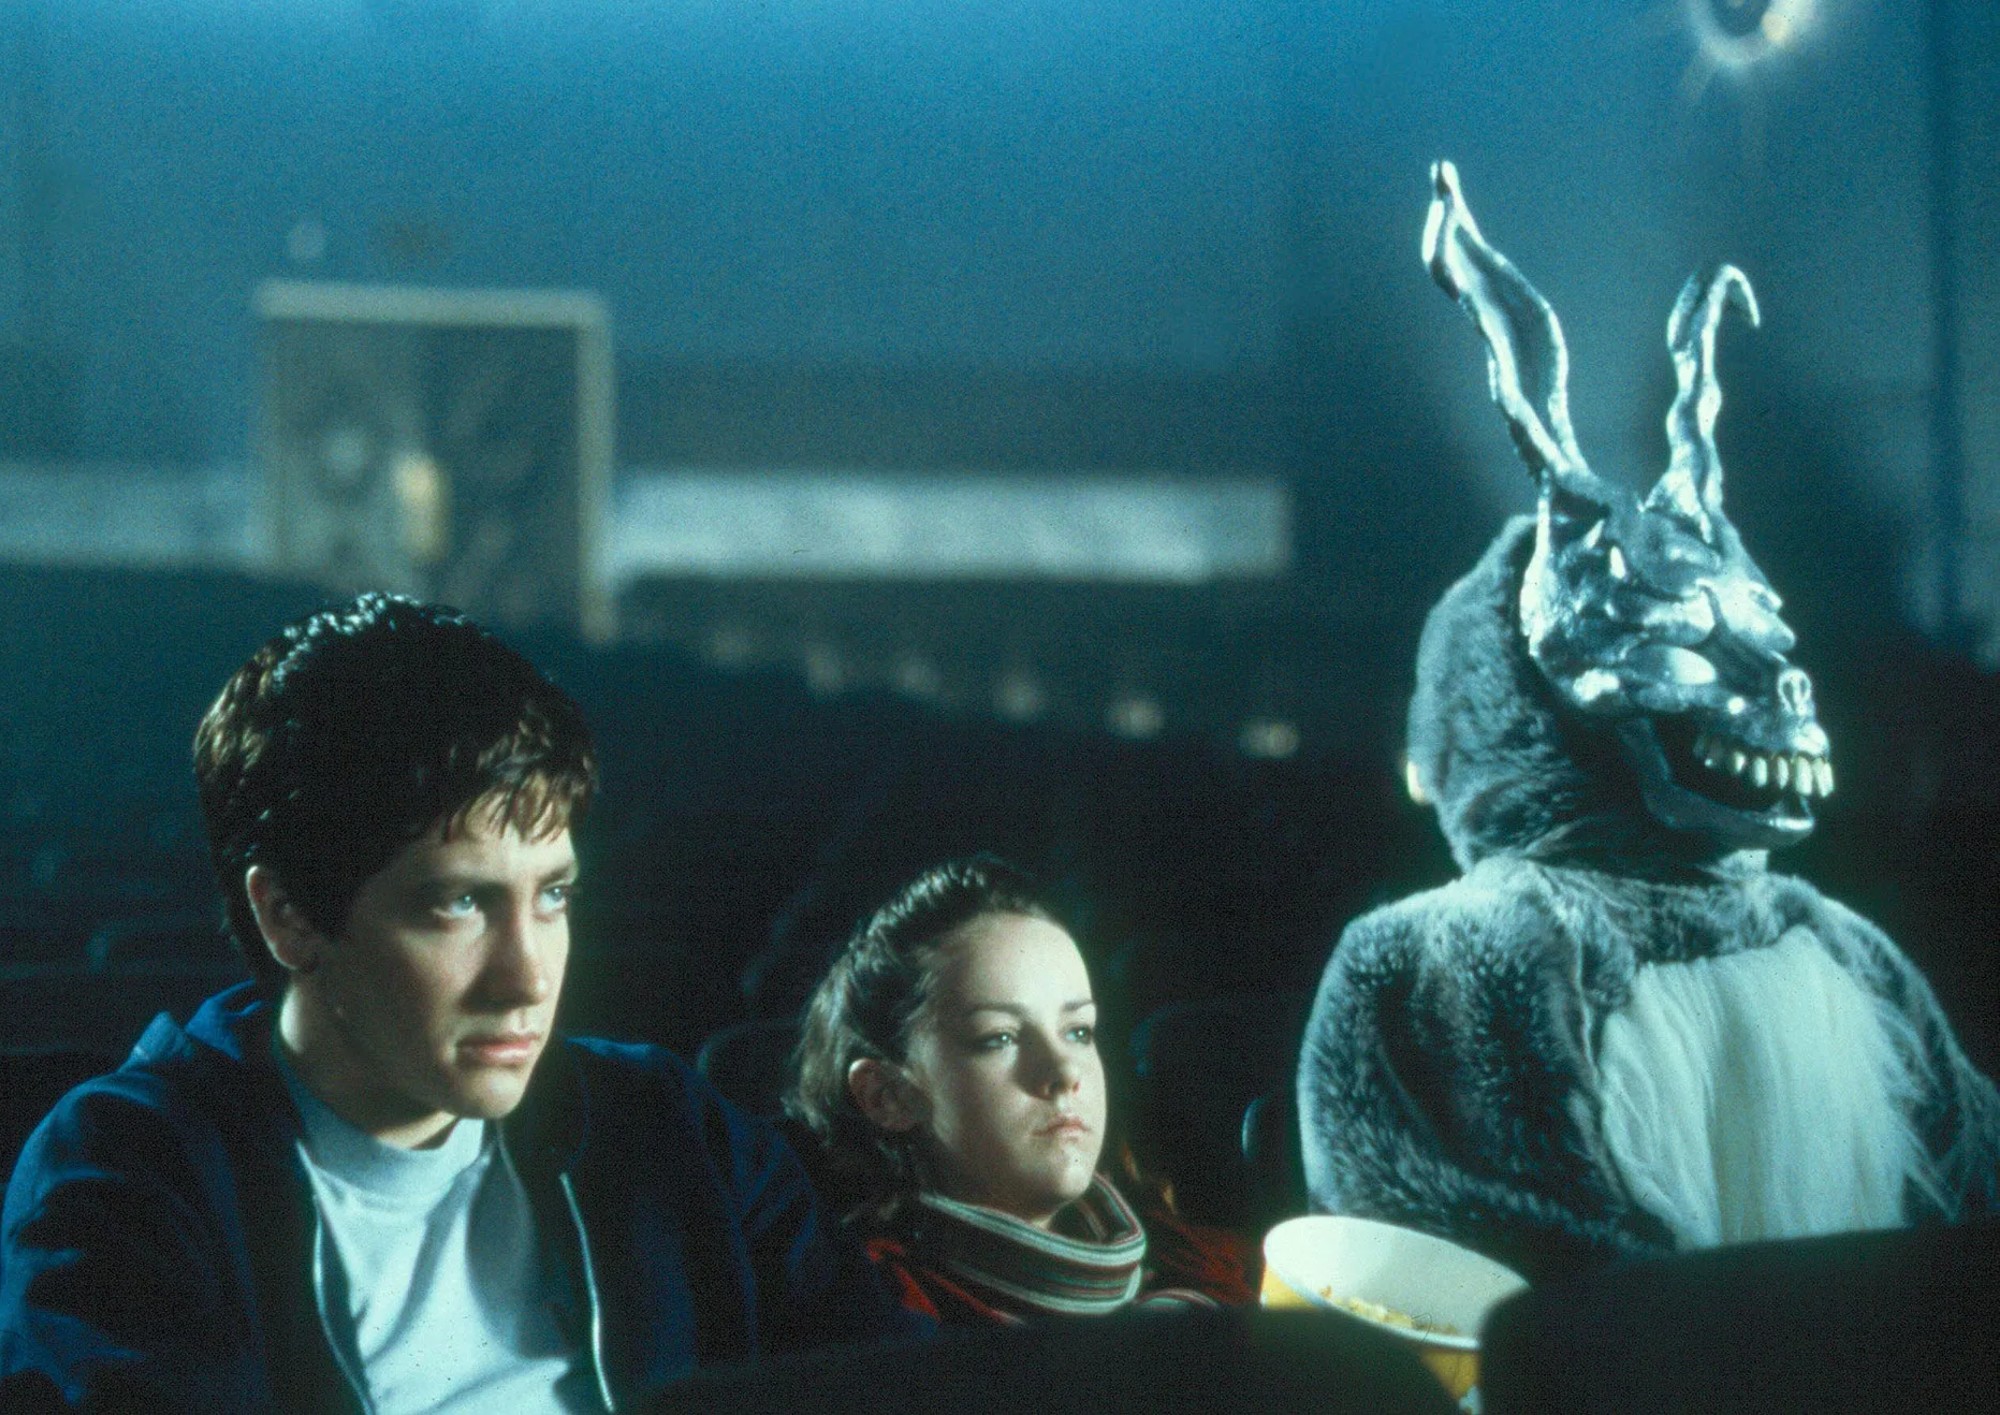 Image from the motion picture Donnie Darko